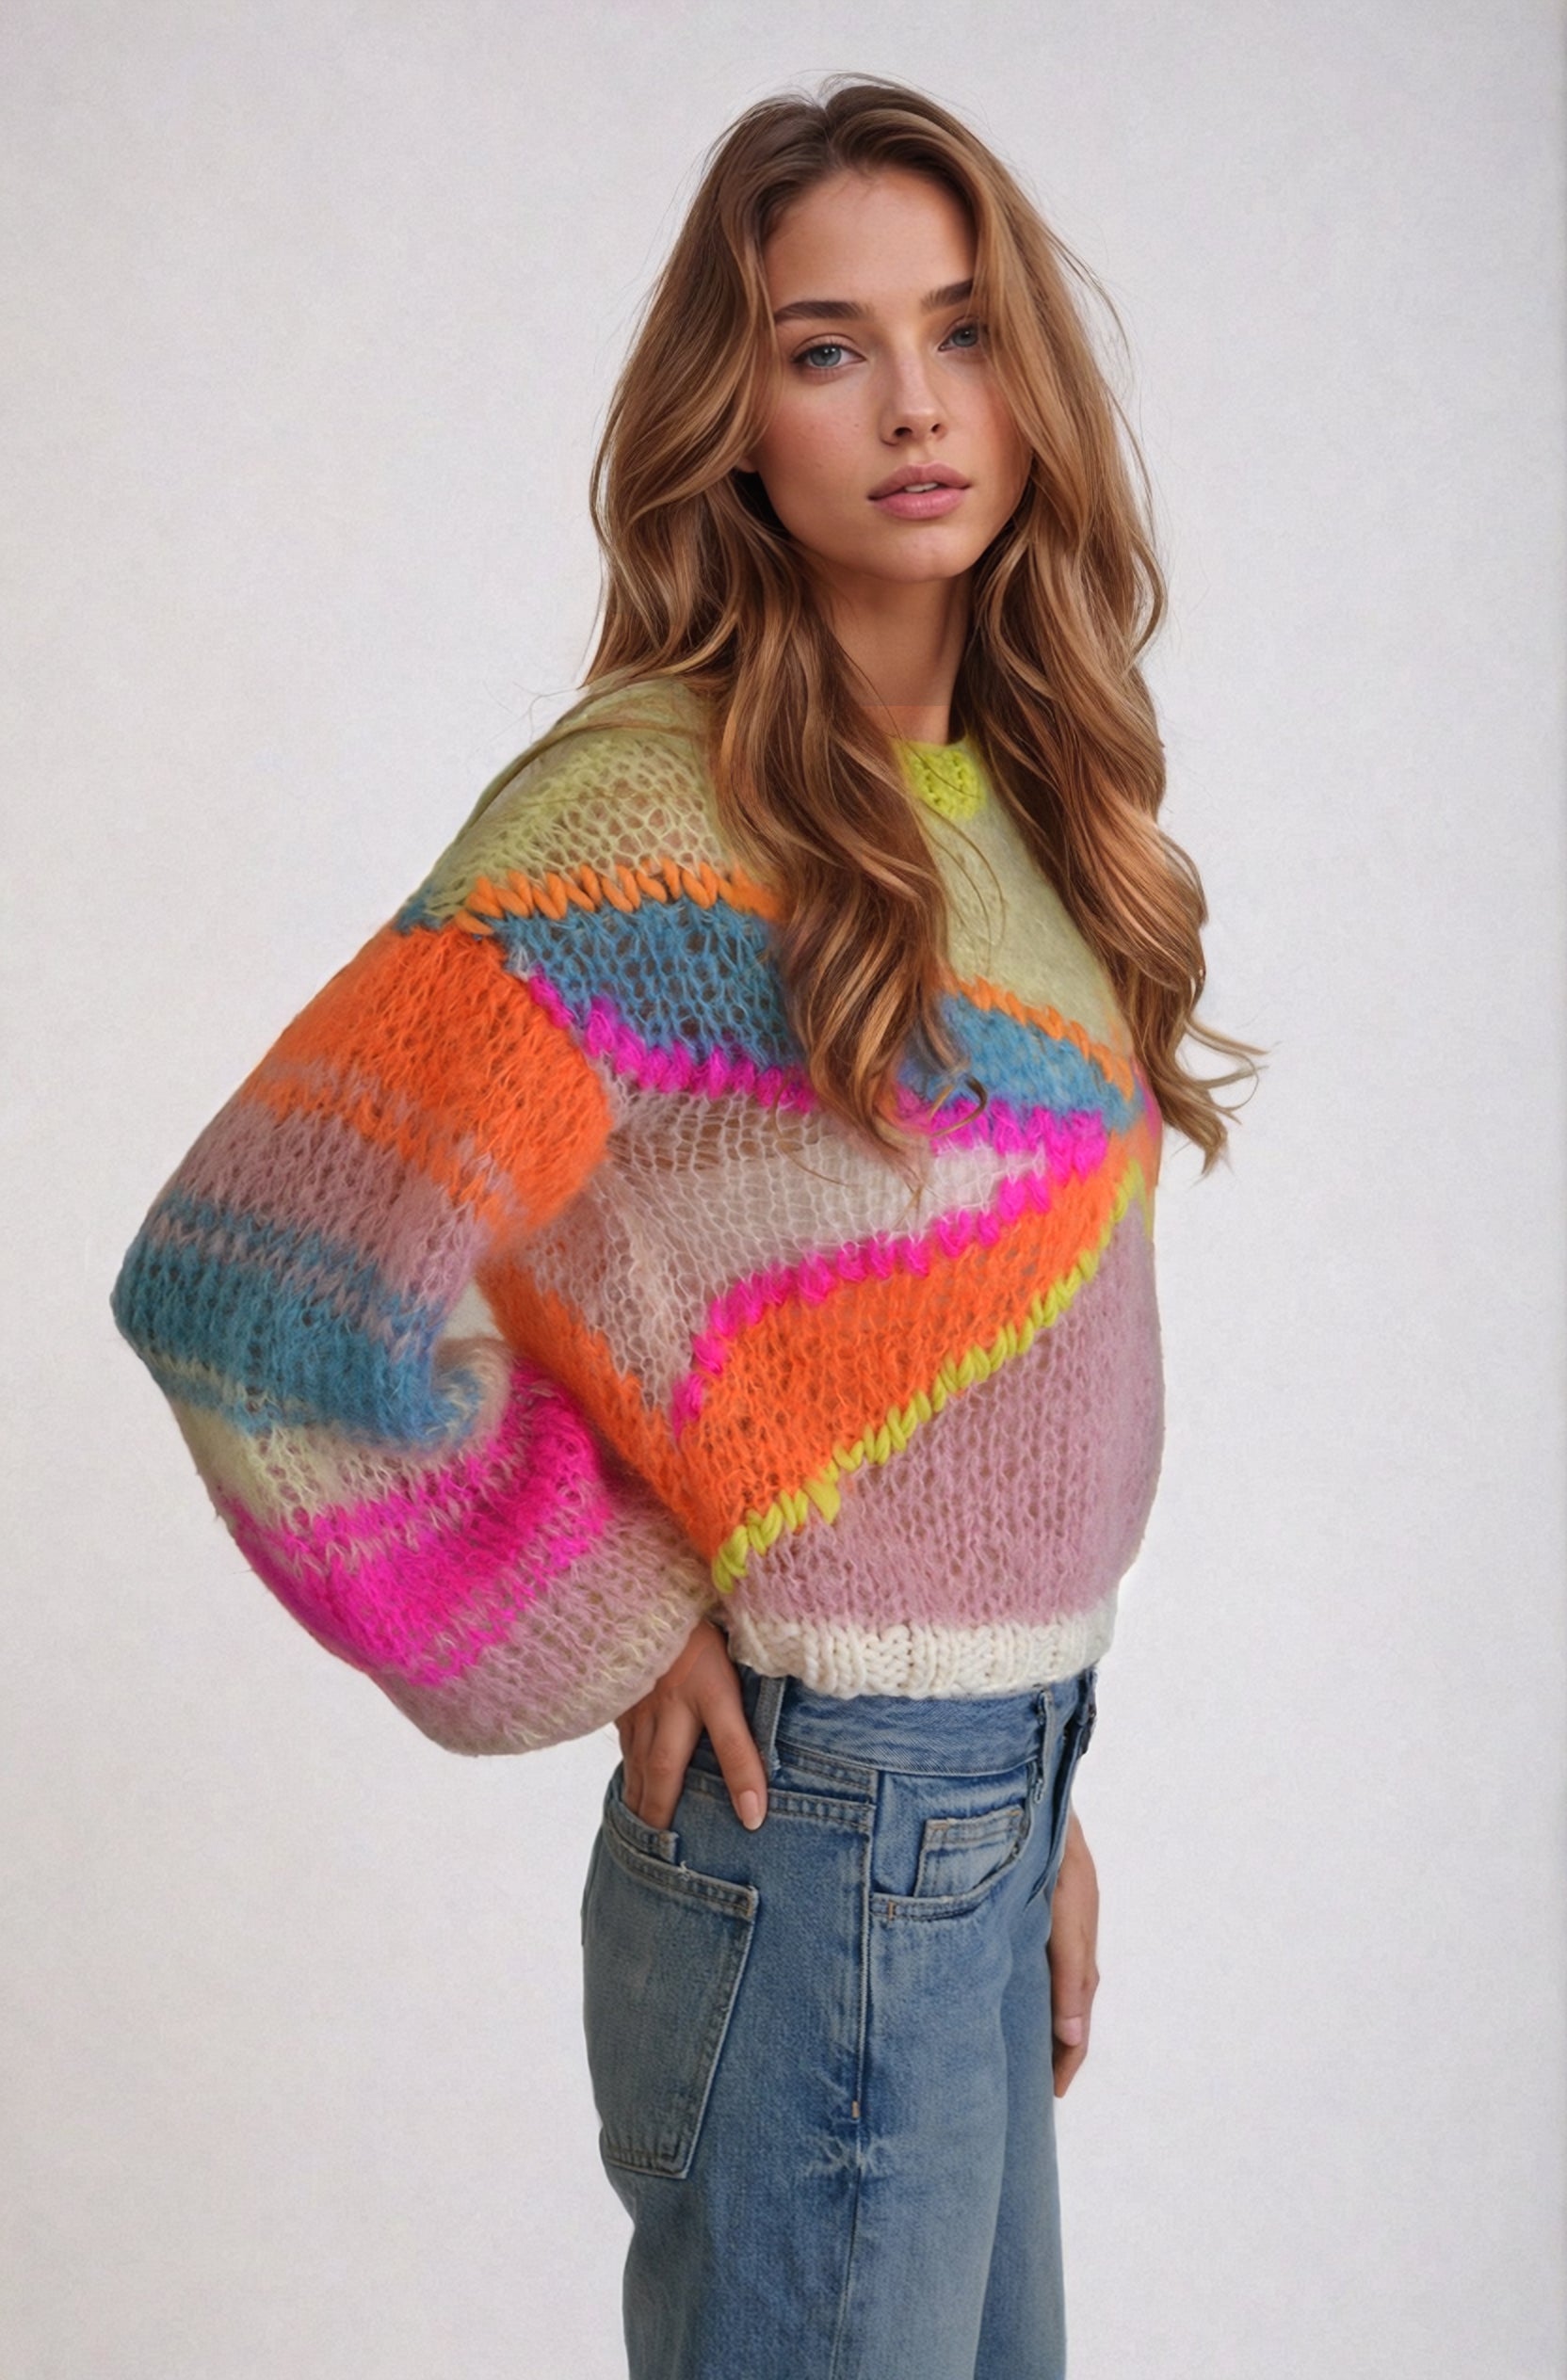 Handknitted sweater,colorful knitwear, handmade sweater, Handmade cardigan, colorful fashion,Handknitted jacket, colorful sweater